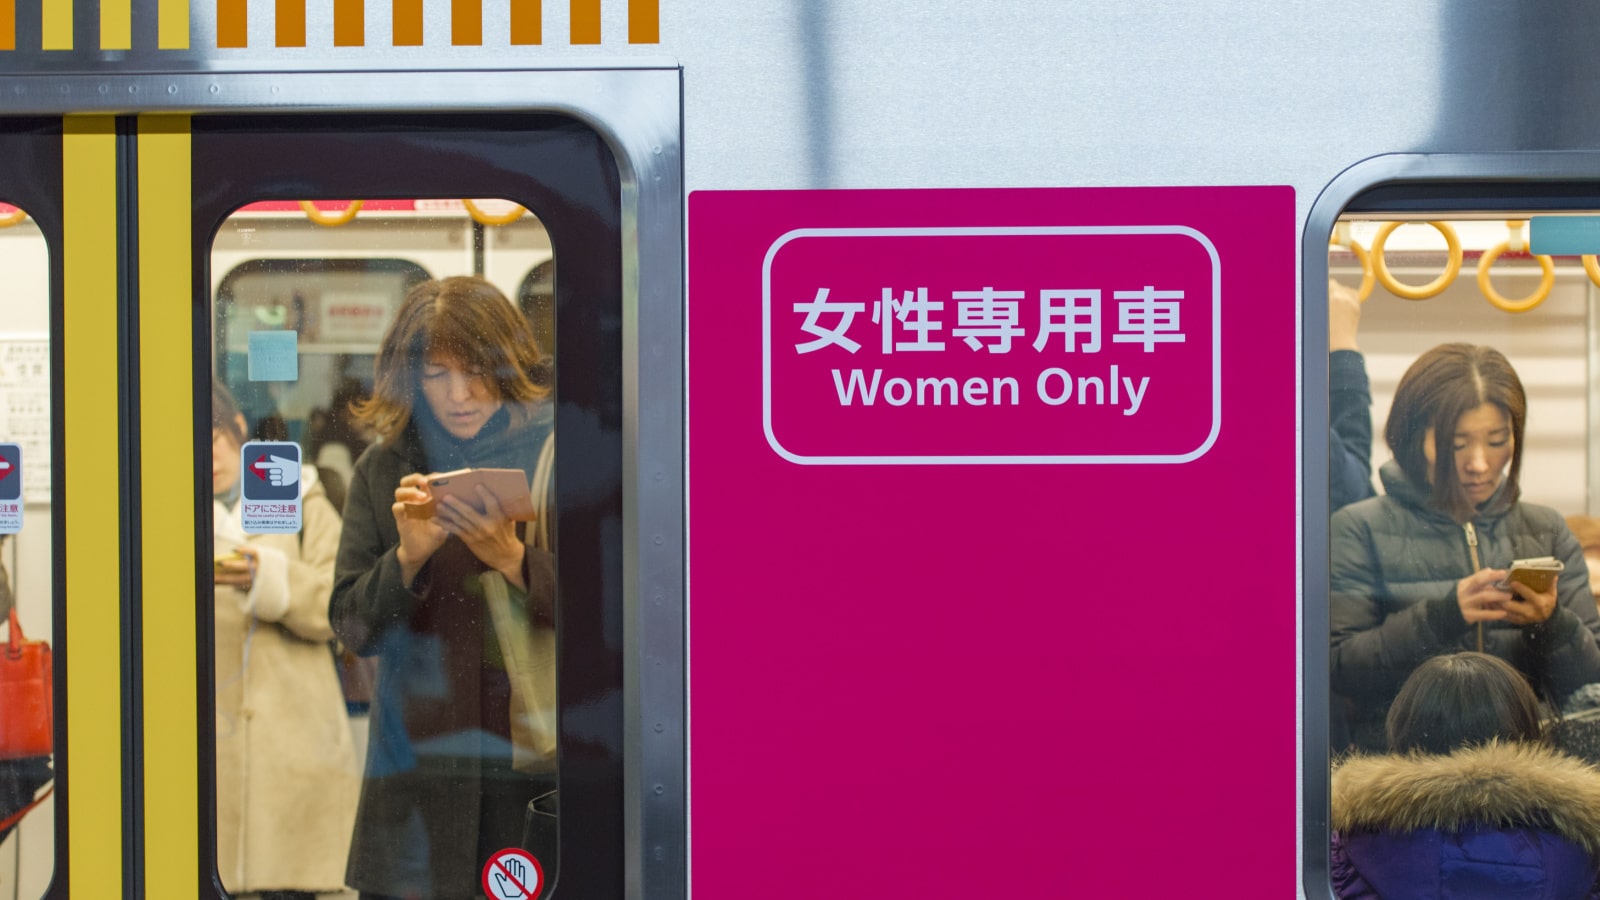 Woman only train car in Japan